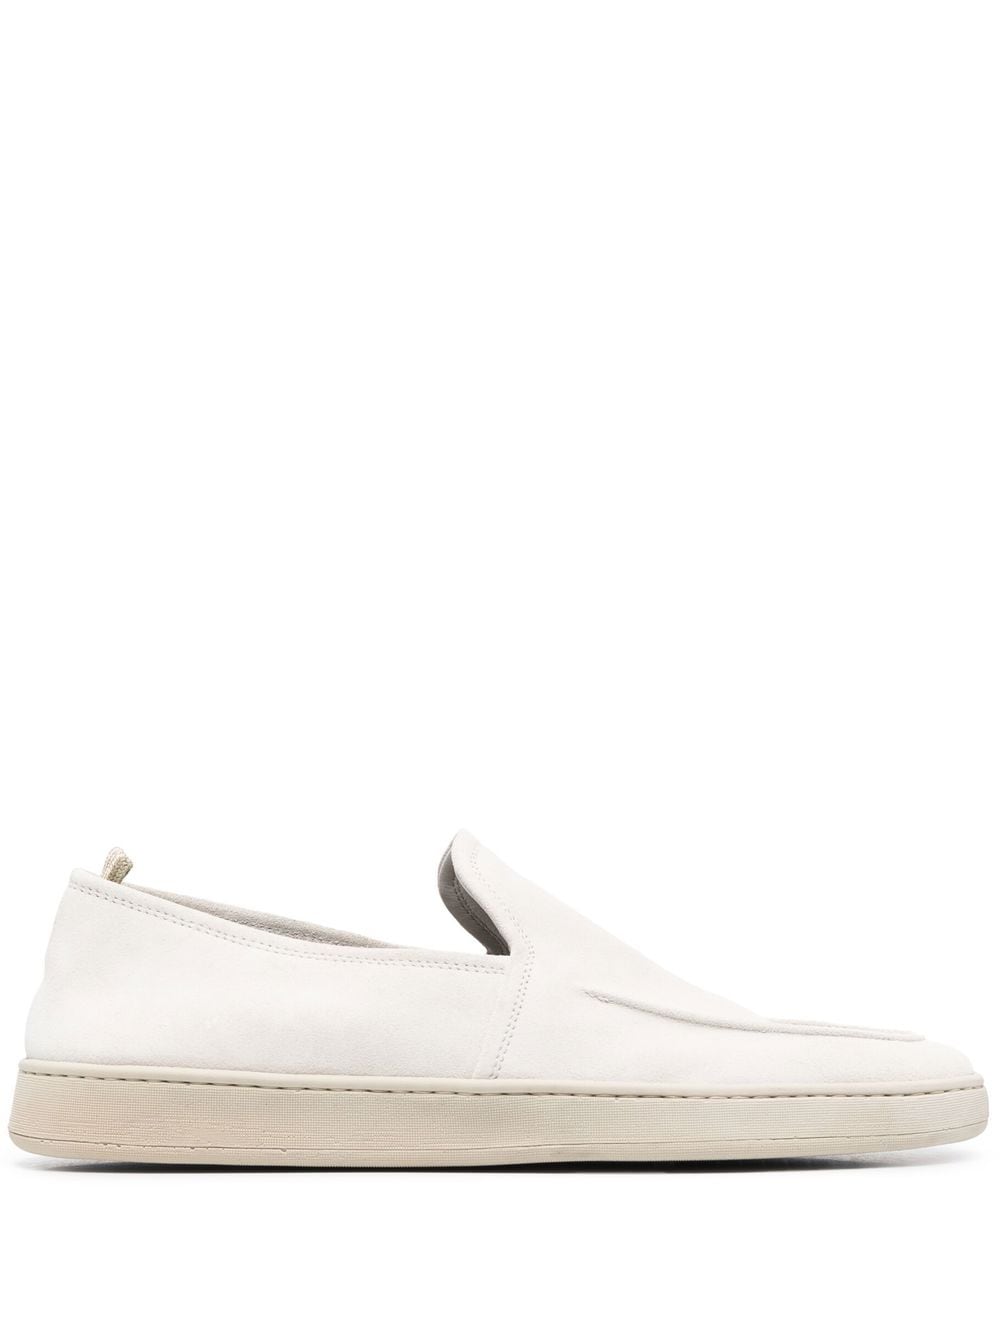 Officine Creative Herbie Leather Loafers In White